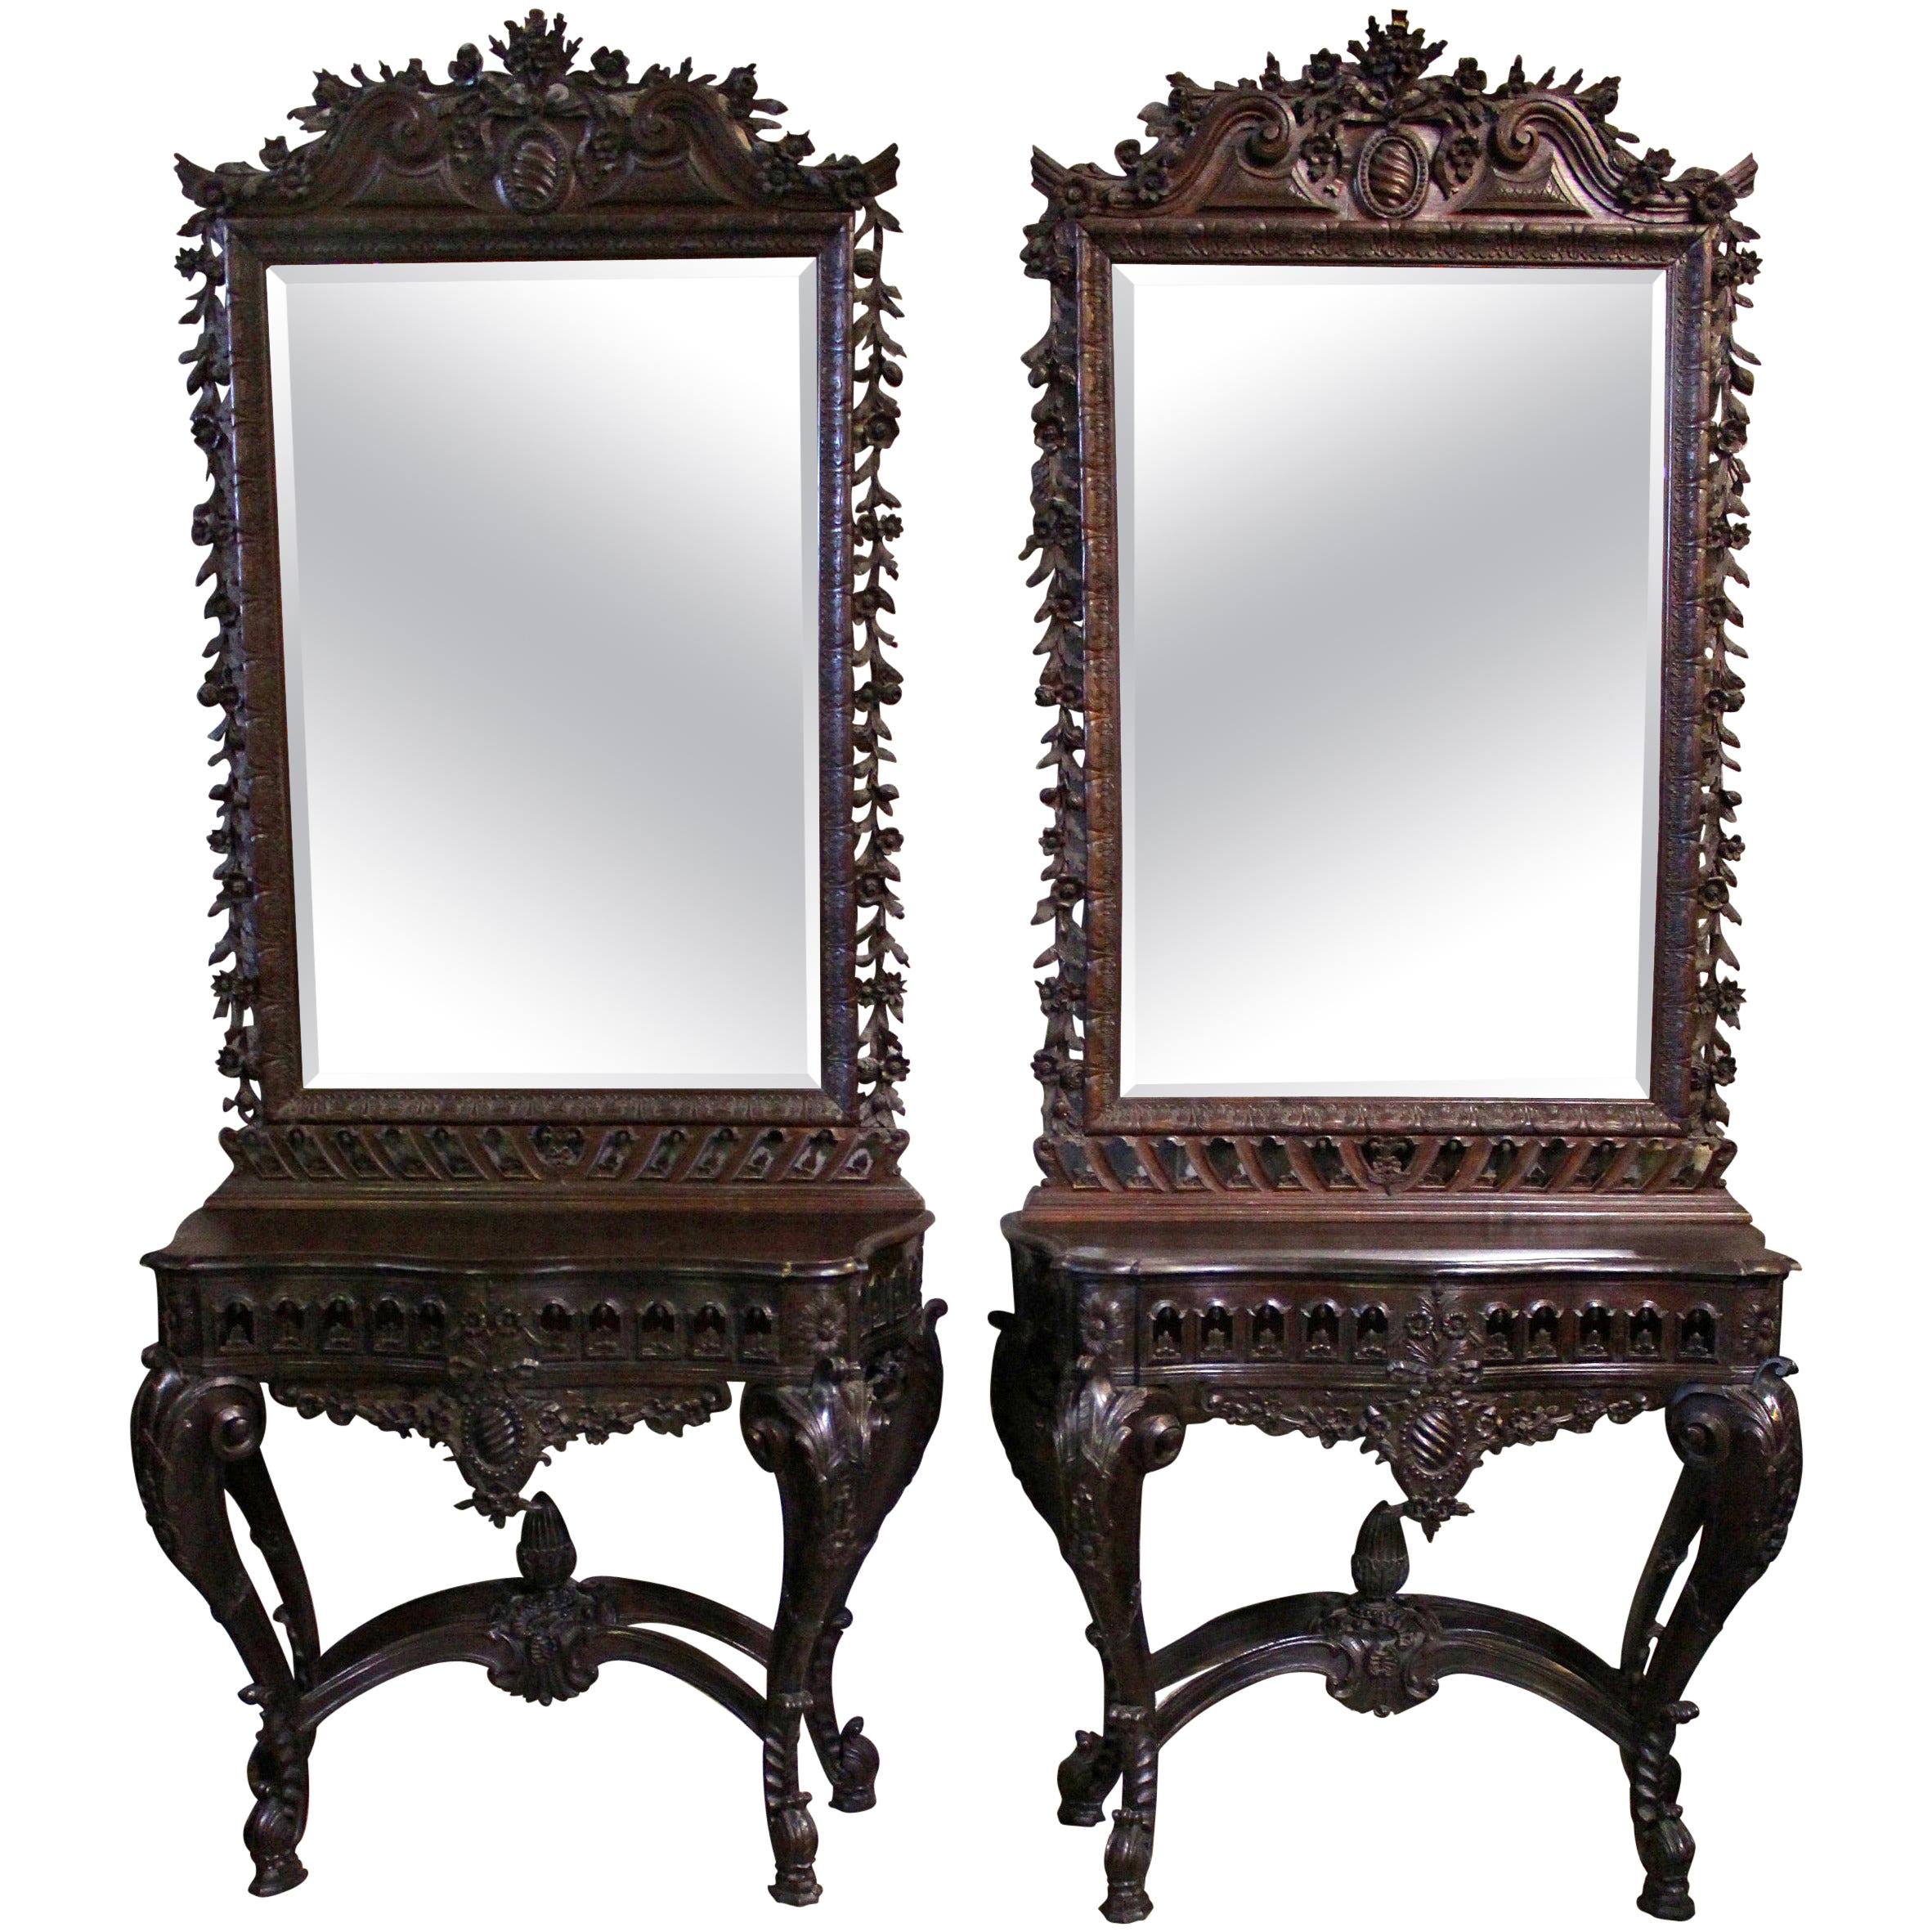 19th Century Pair of Portuguese Rococo Style Console Tables and Mirrors